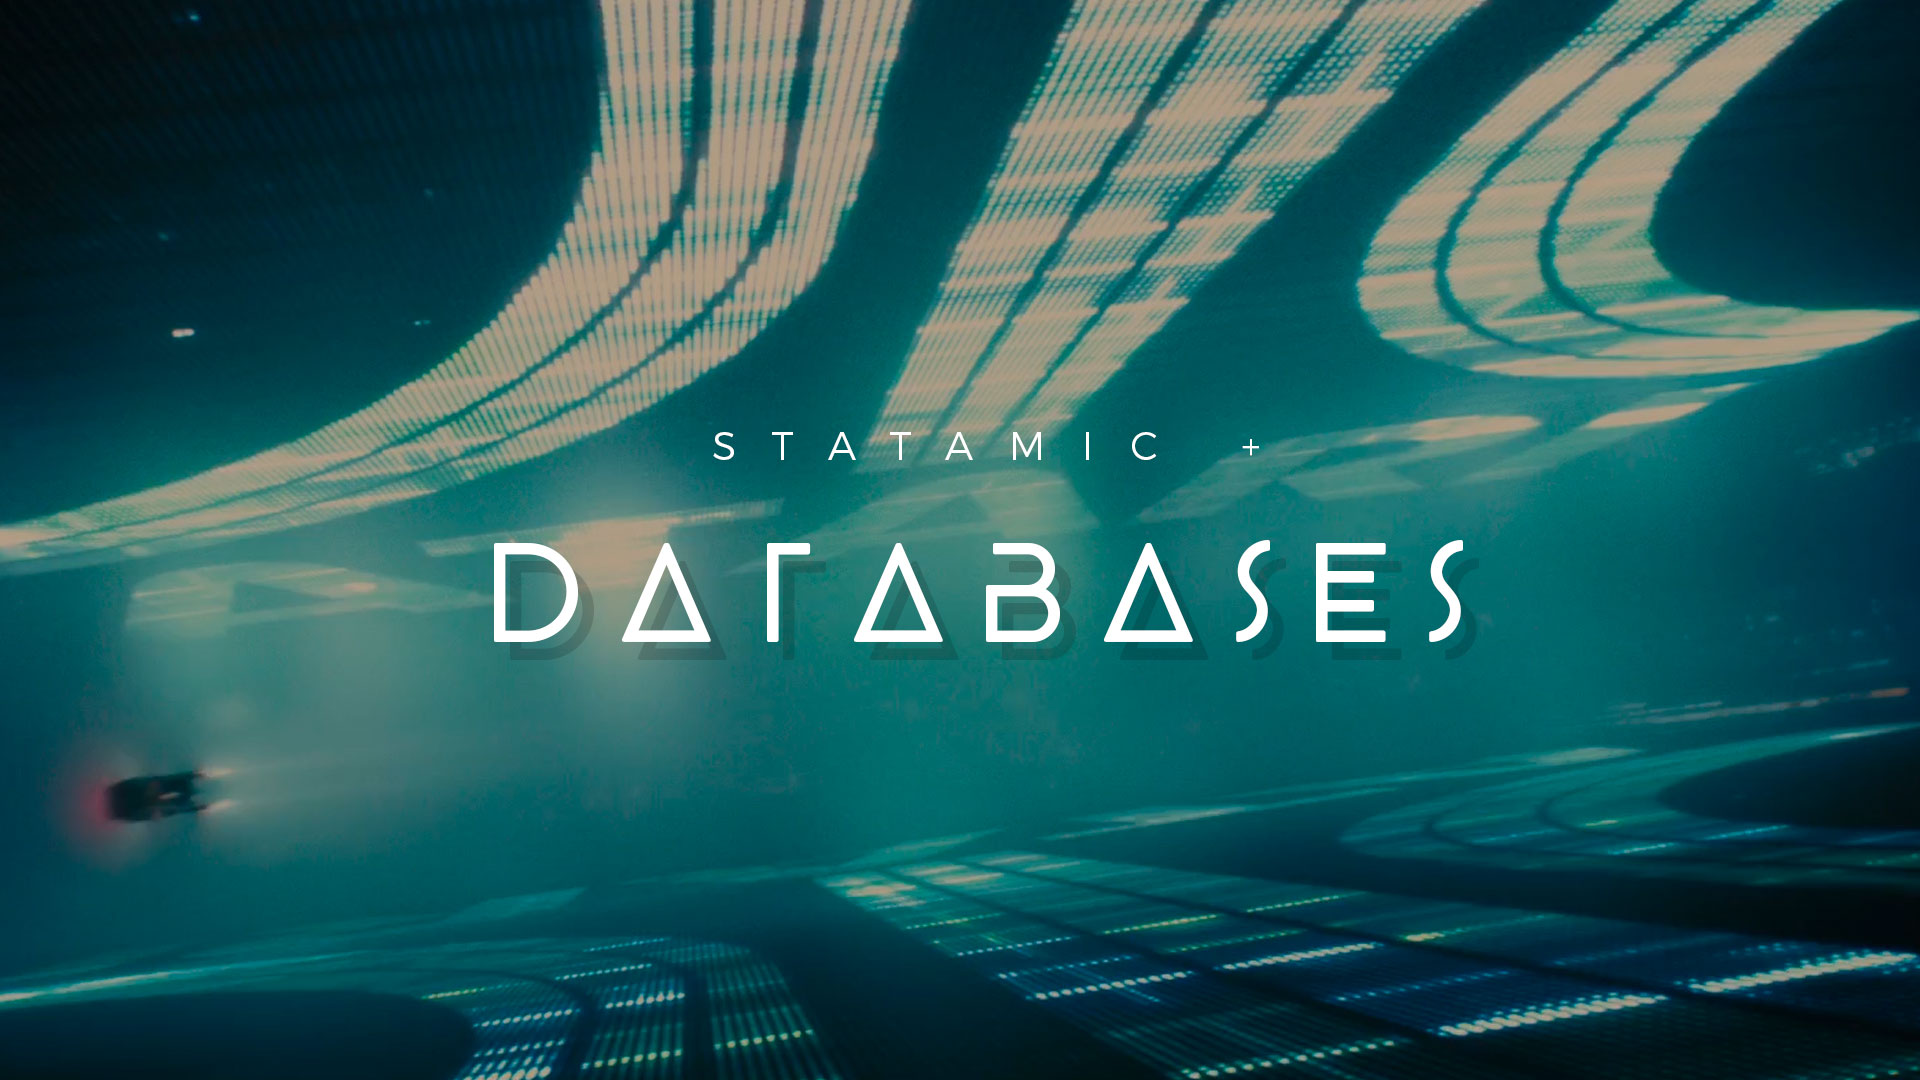 If you've ever wanted to use a Database along with Statamic, we'll show you how. We even did all the work for you.